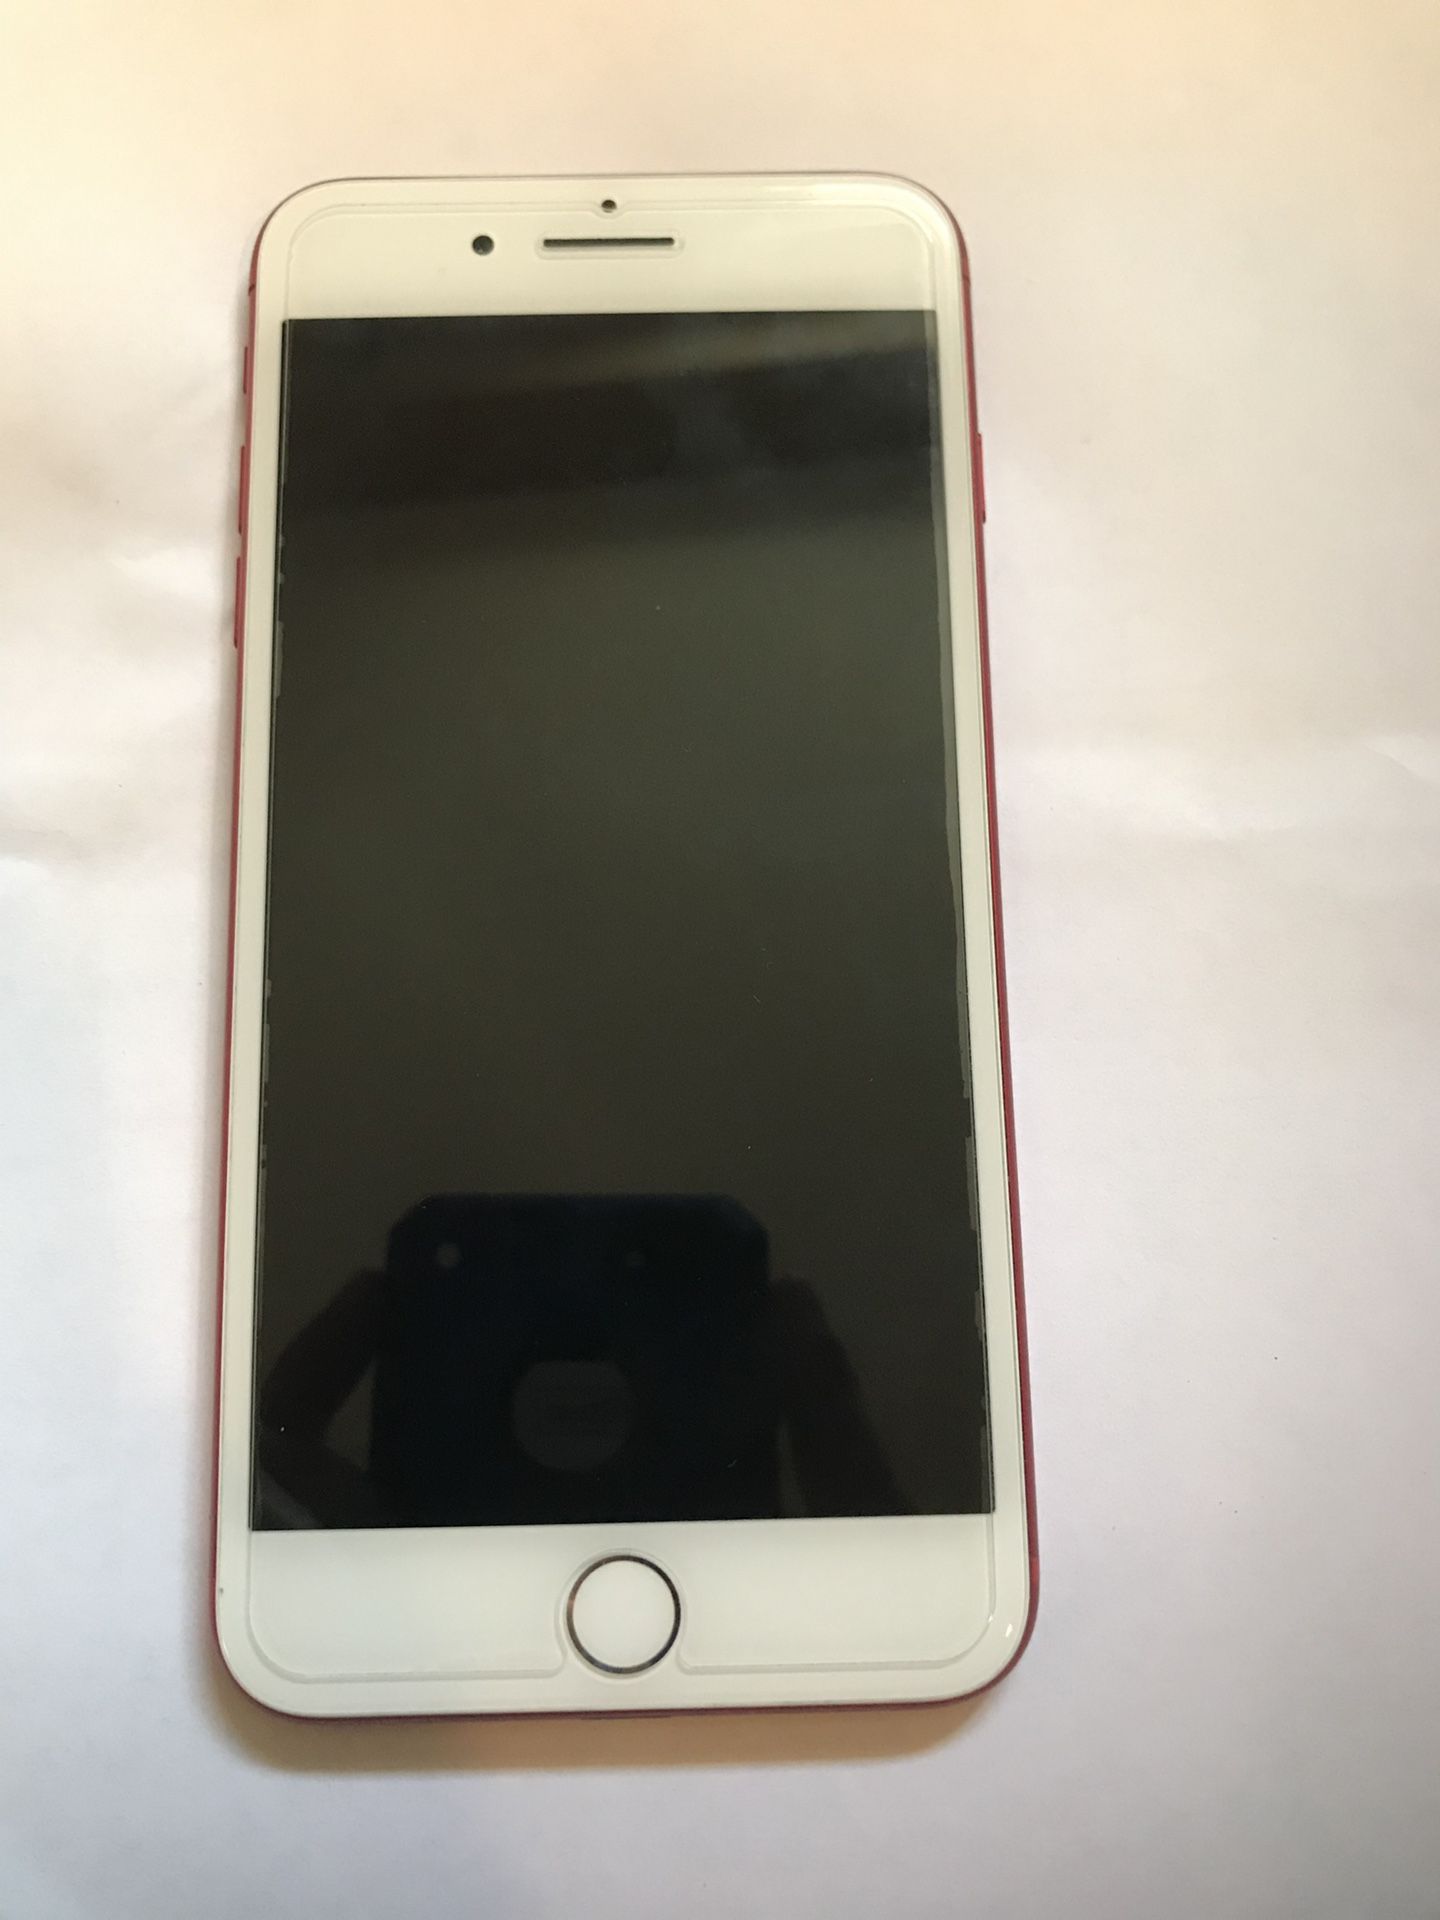 RED EDITION, IPHONE 7 PLUS 256 GB FACTORY UNLOCKED